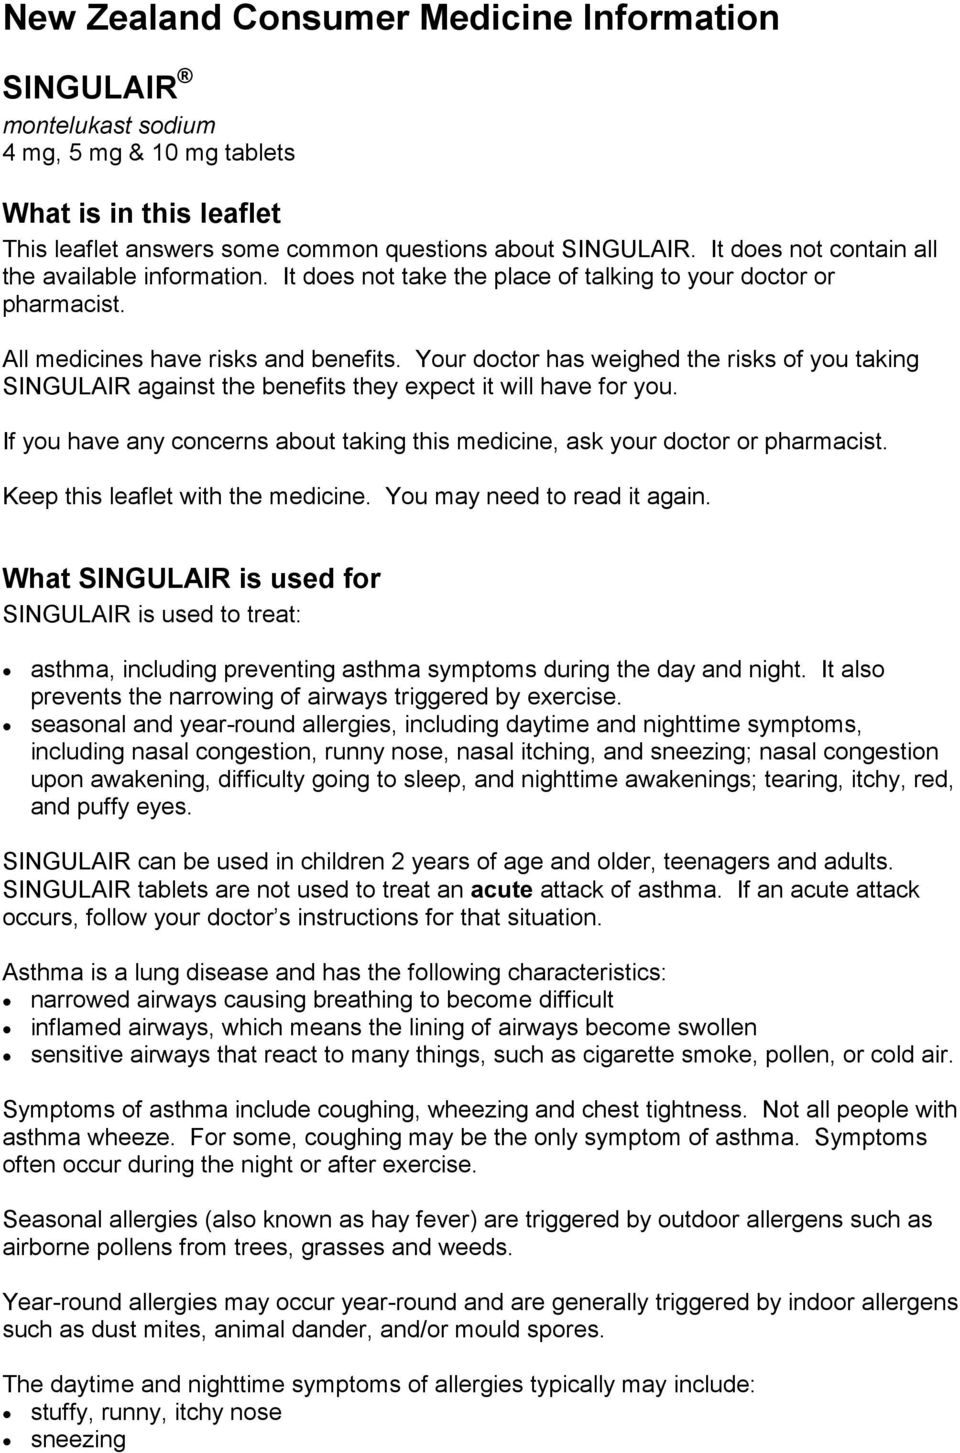 Your doctor has weighed the risks of you taking SINGULAIR against the benefits they expect it will have for you. If you have any concerns about taking this medicine, ask your doctor or pharmacist.